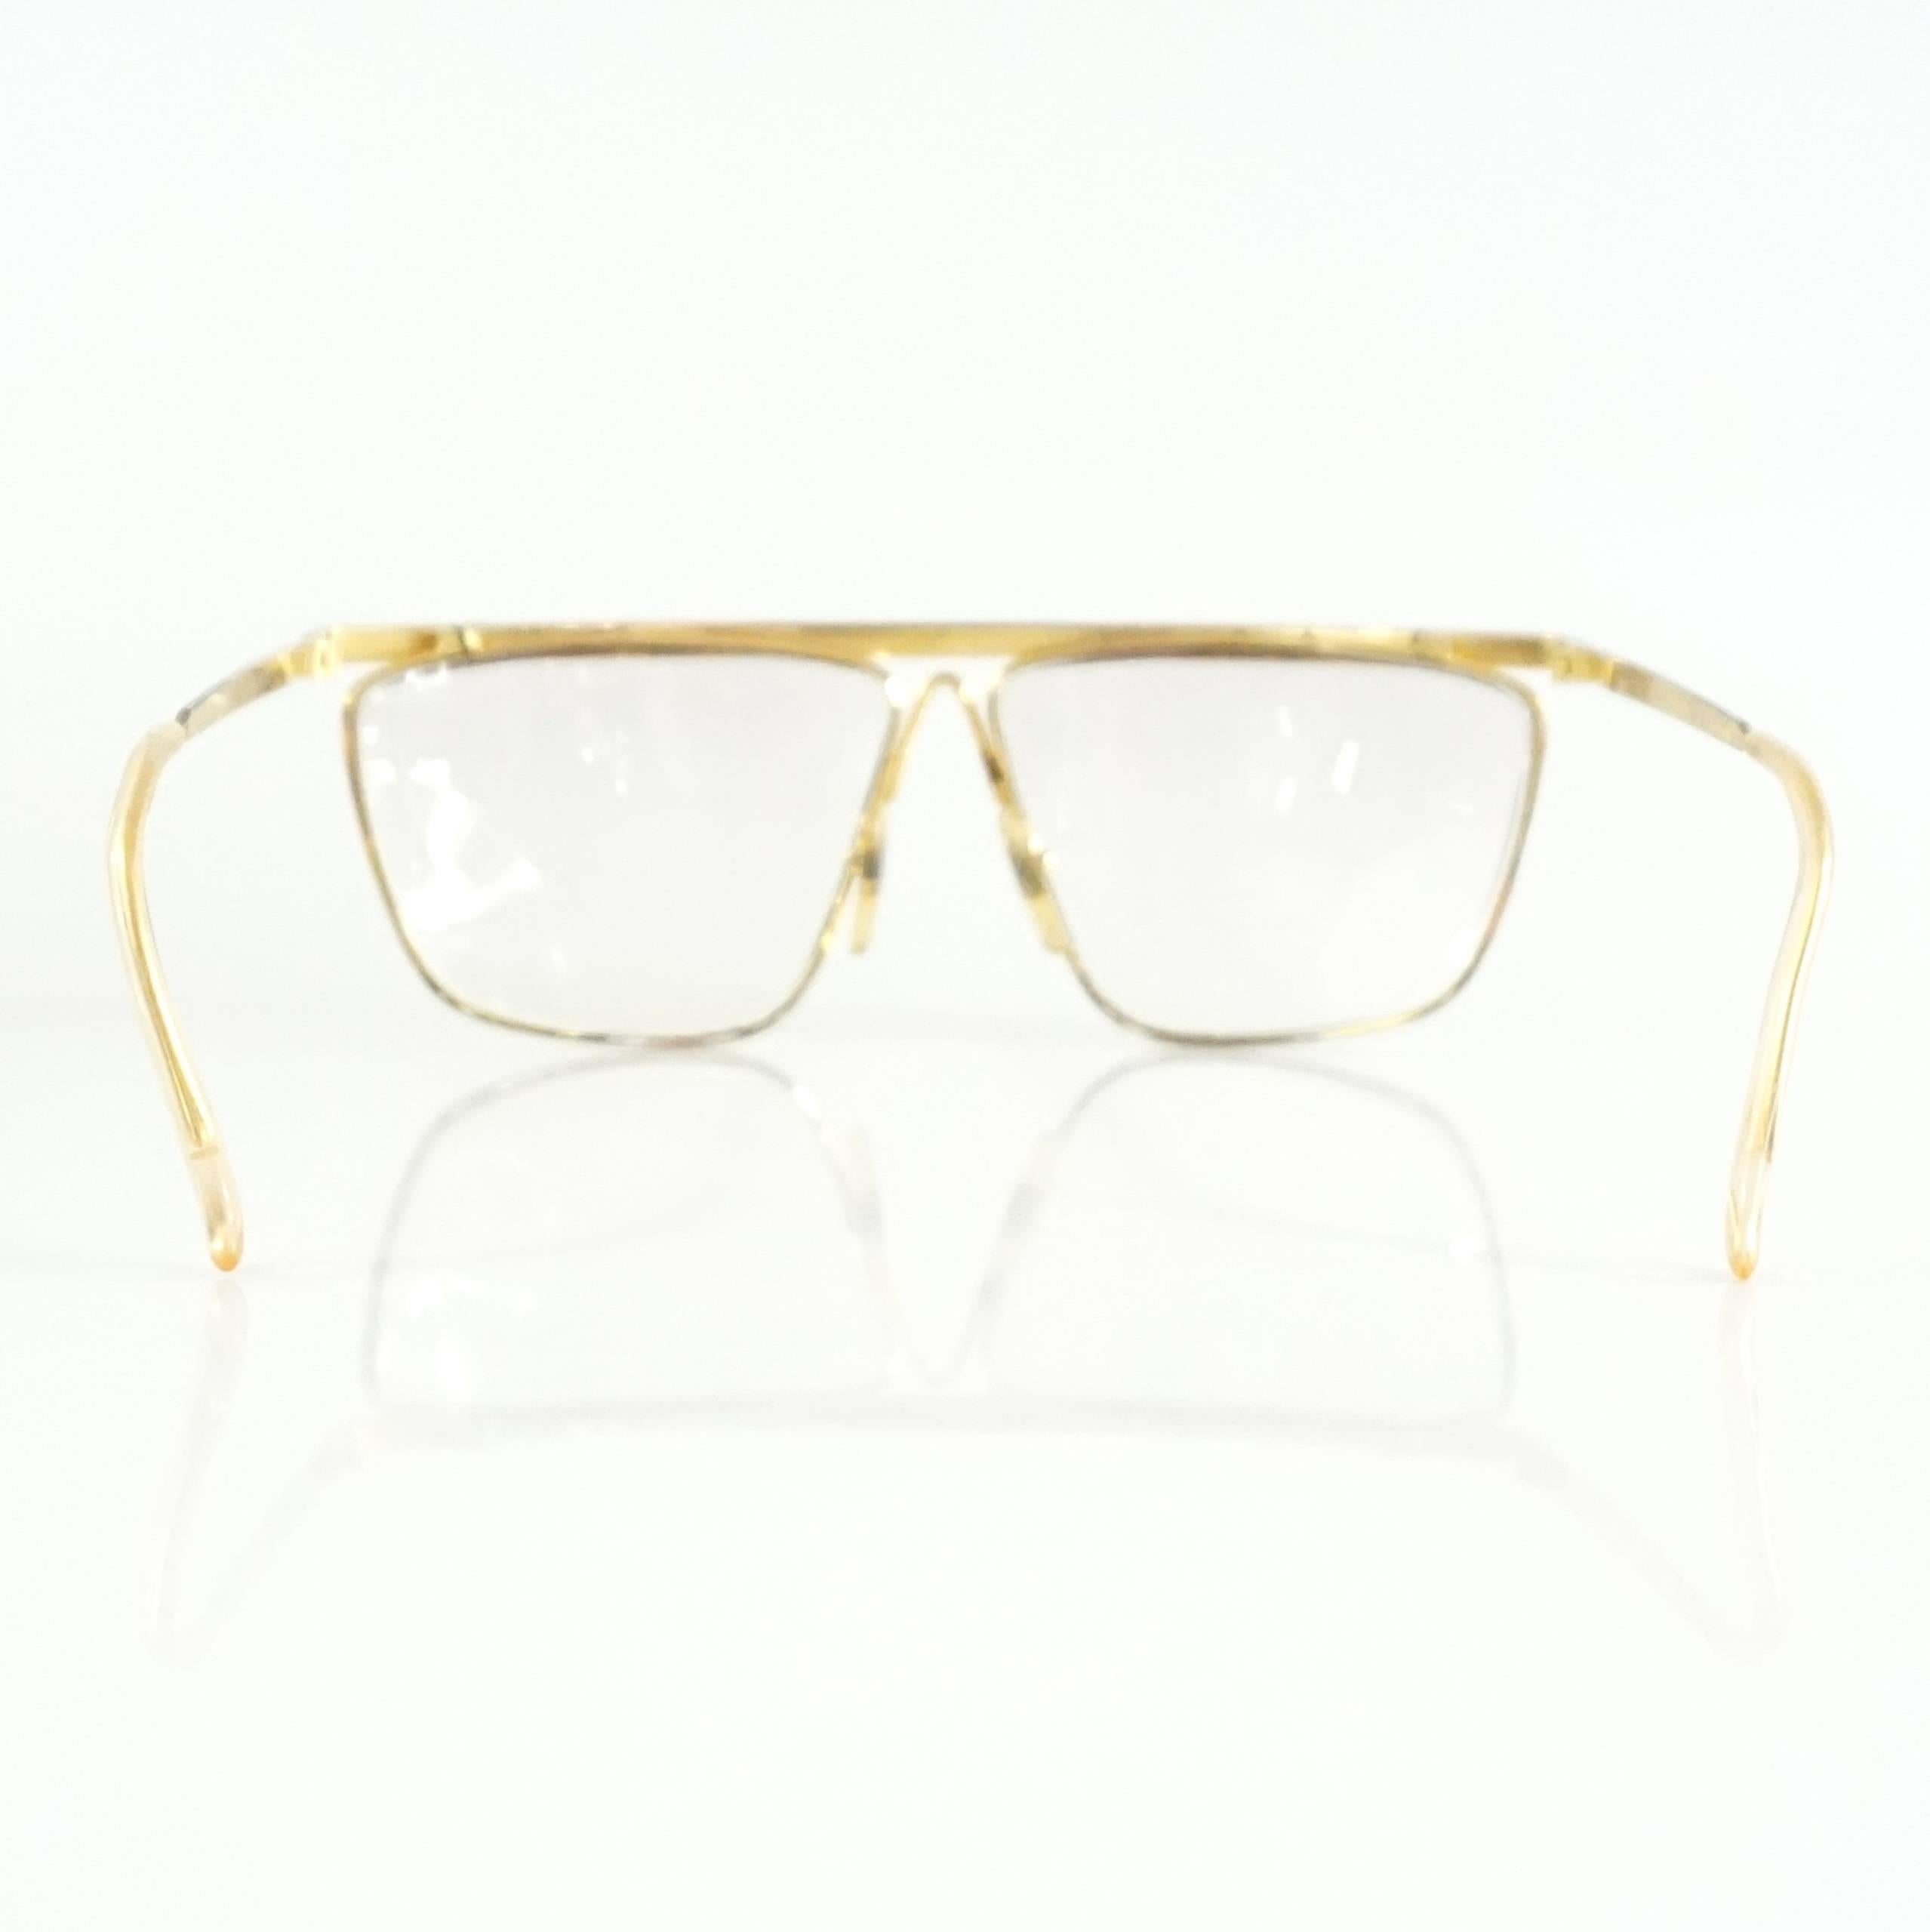 White Laura Biagiotti Gold and Silver Large Glasses